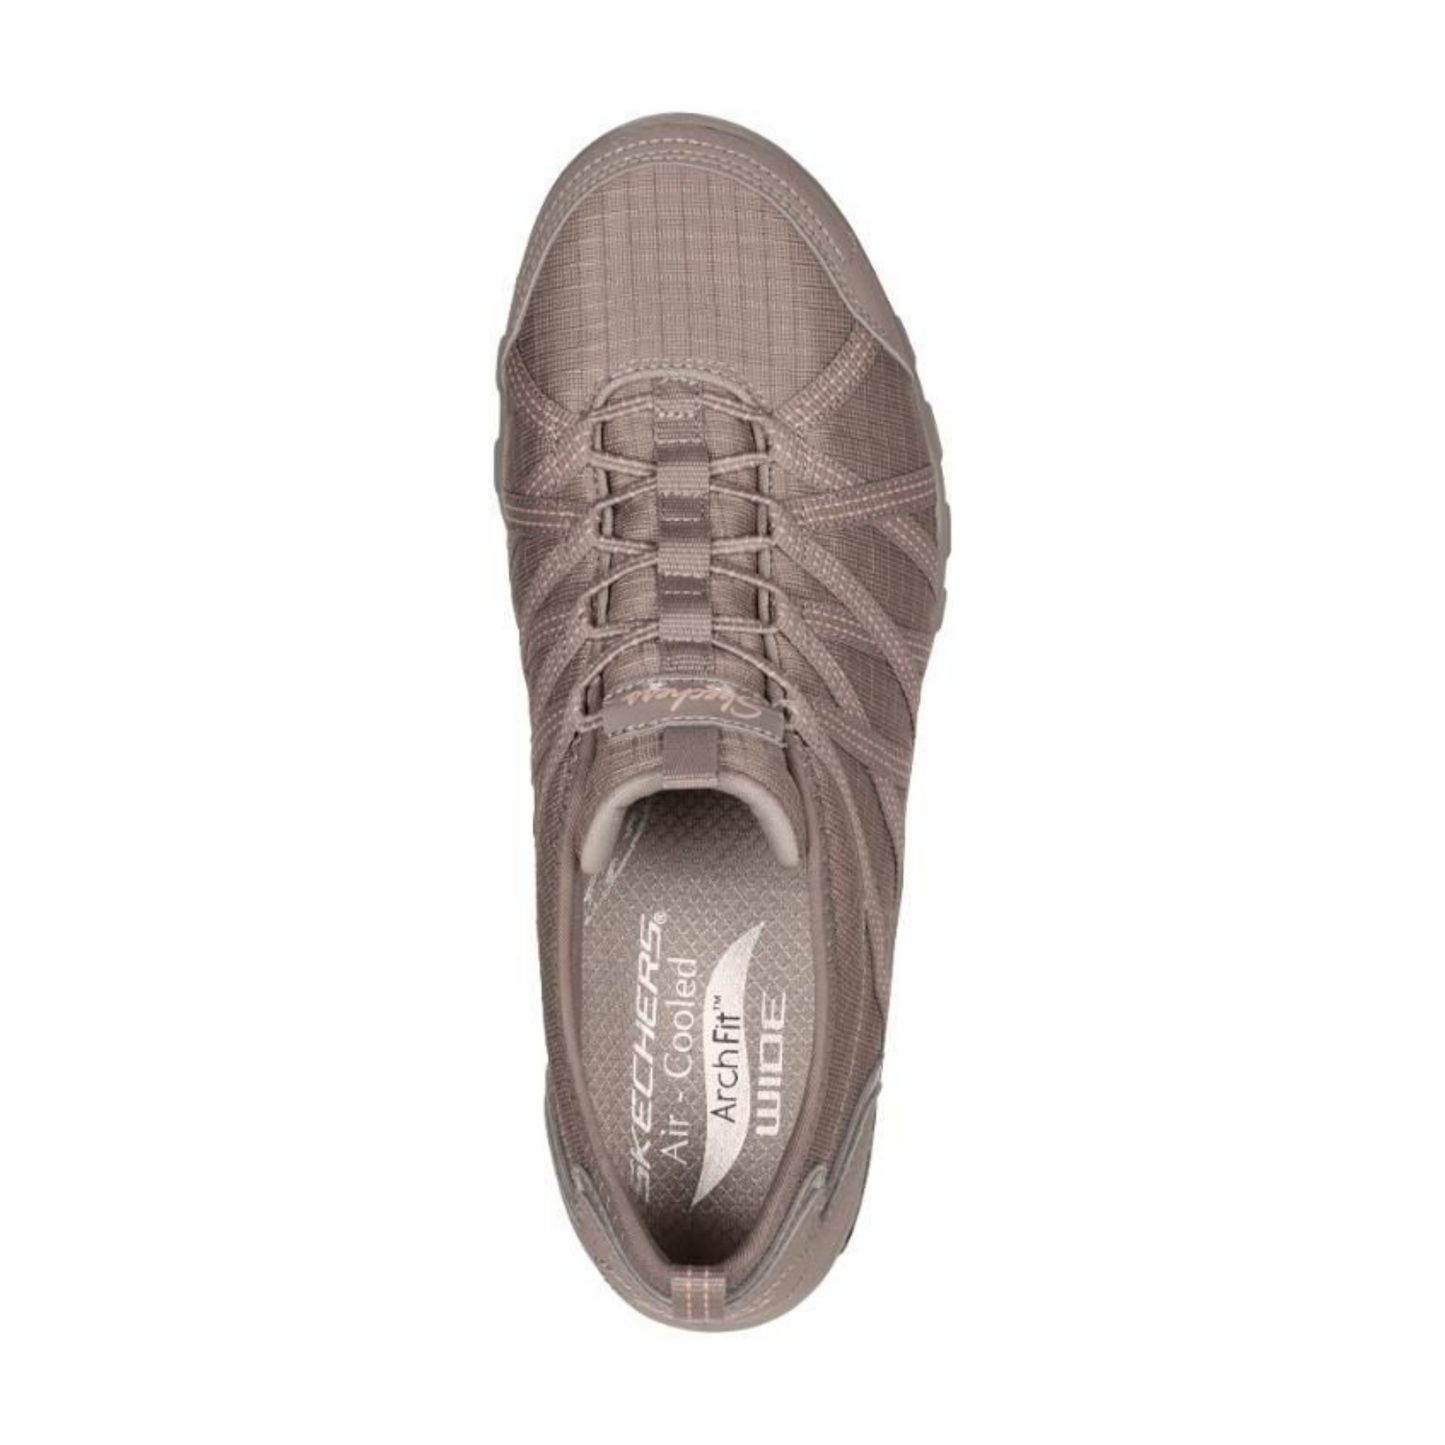 Skechers Ladies Arch Fit Comfy - Paradise Found - Taupe